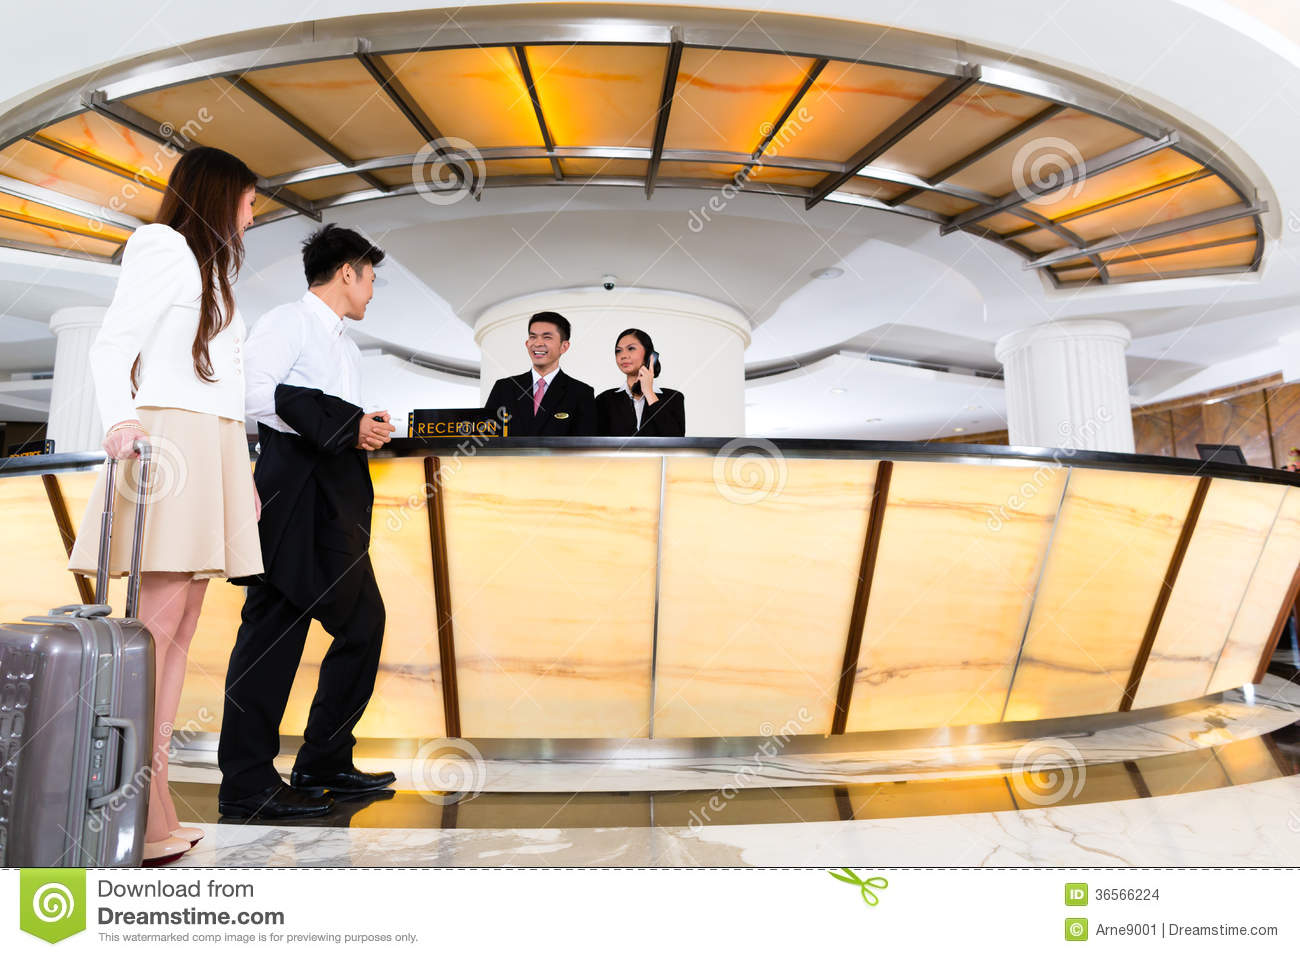     Couple Arriving At Hotel Front Desk Stock Images   Image  36566224